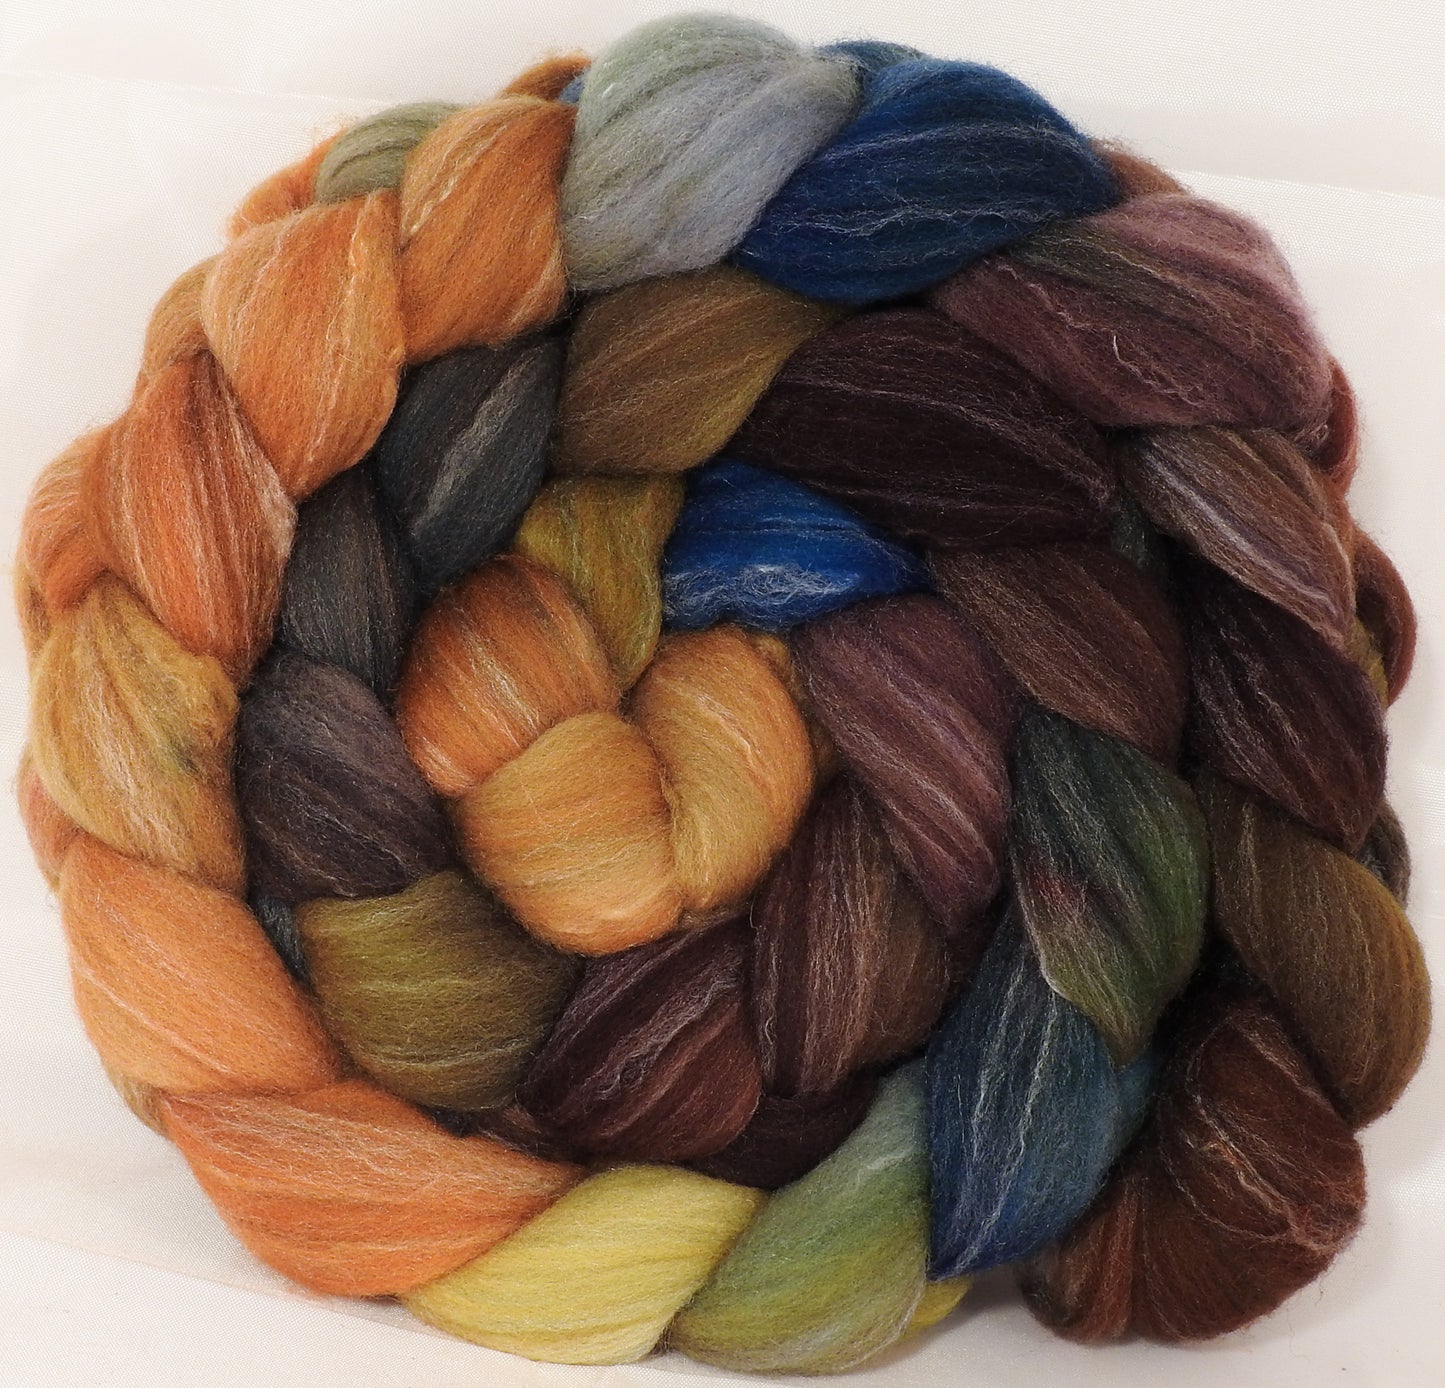 Hand dyed top for spinning -Into the Dalek- Targhee/silk/ bamboo ( 80/10/10) - Inglenook Fibers